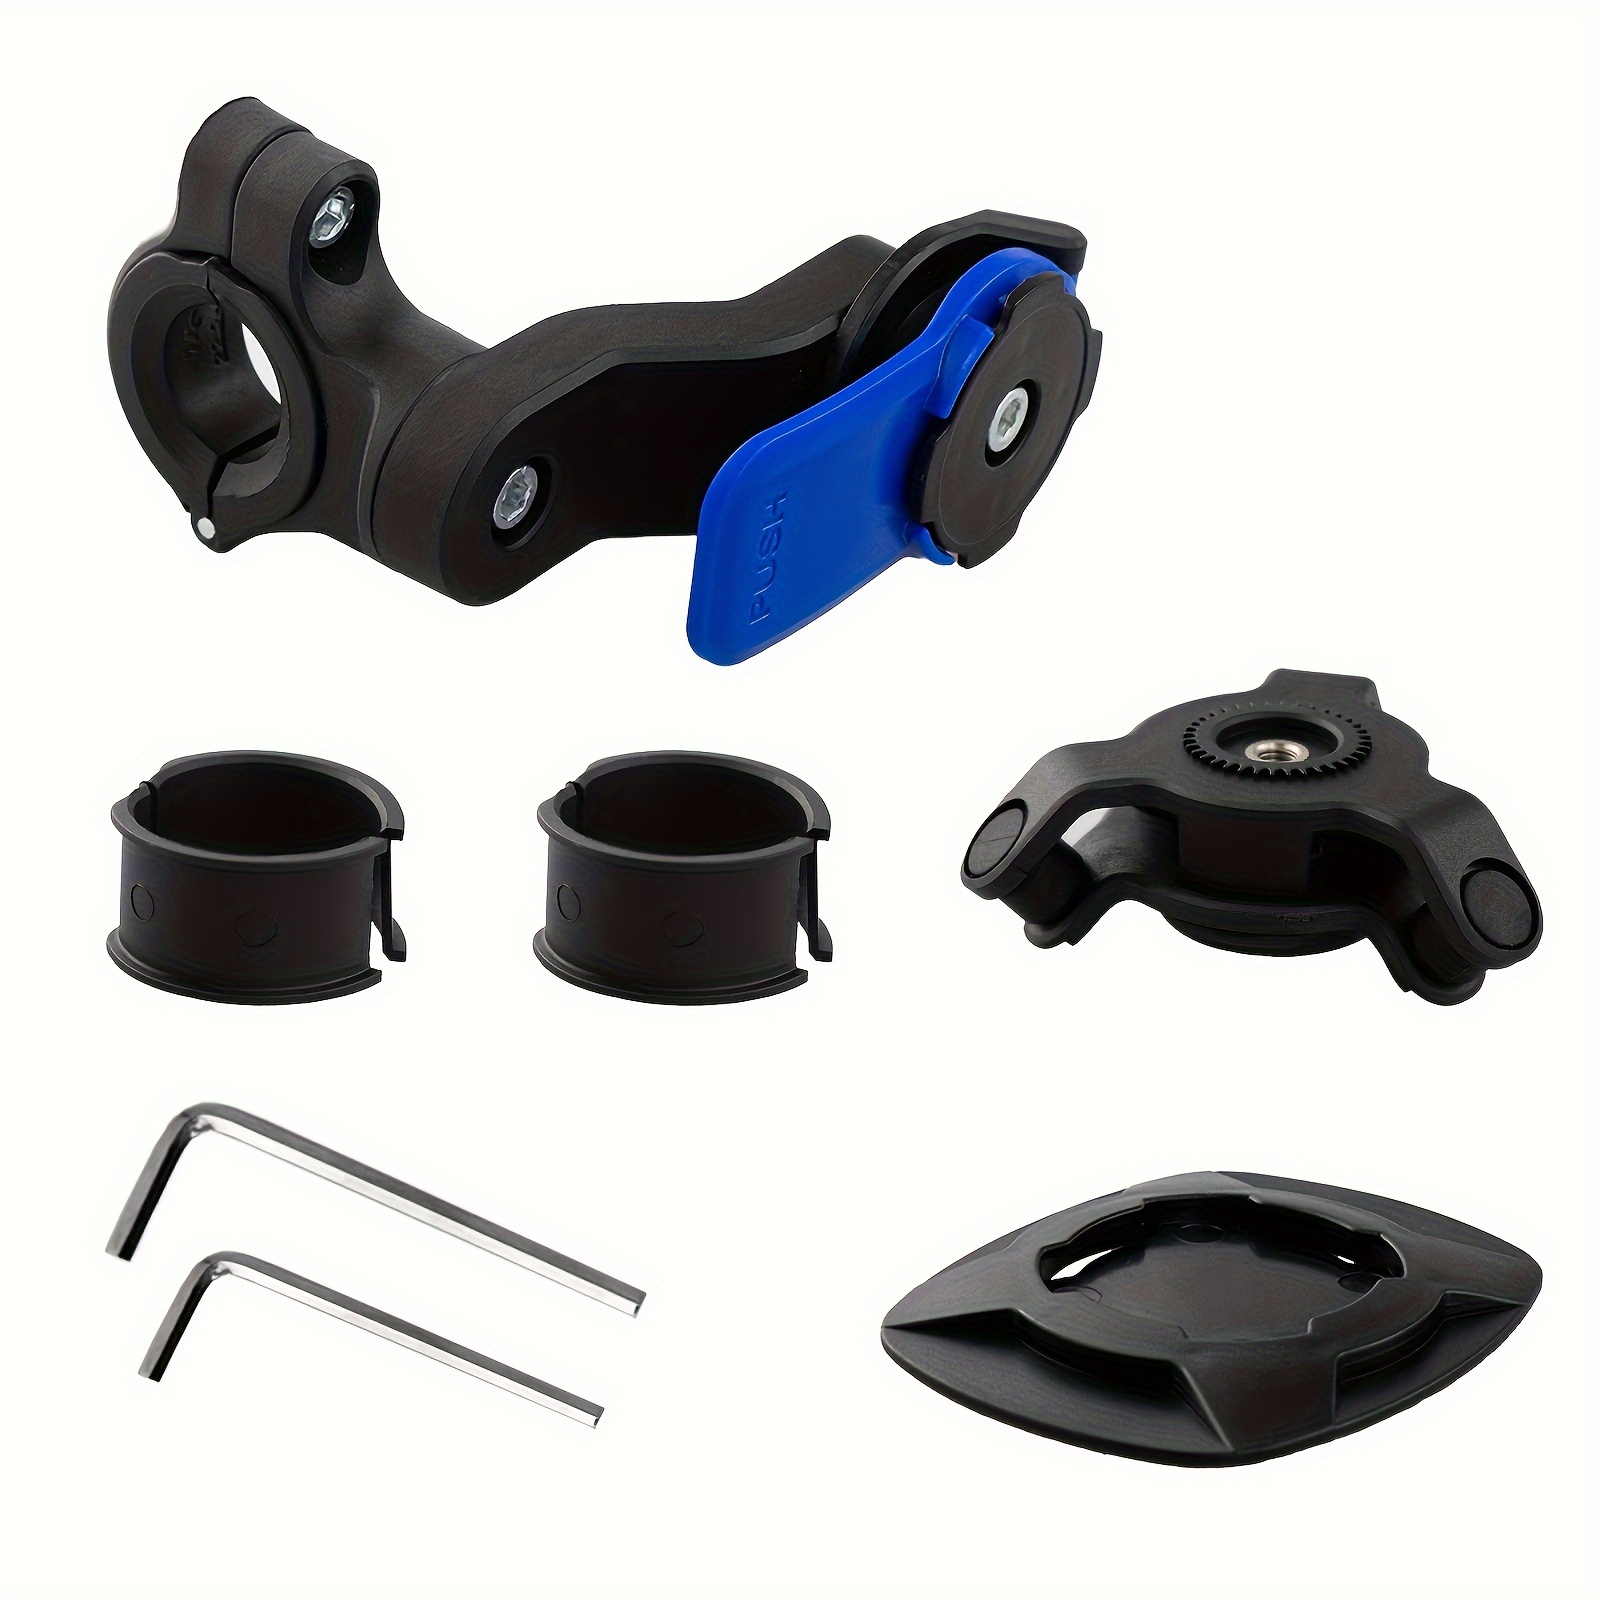 

1pc Car Mobile Phone Bracket, Mobile Phone Installation Seat, 360 Rotating Bracket Anti-vibration, Smartphones From 4.7in-7.2in